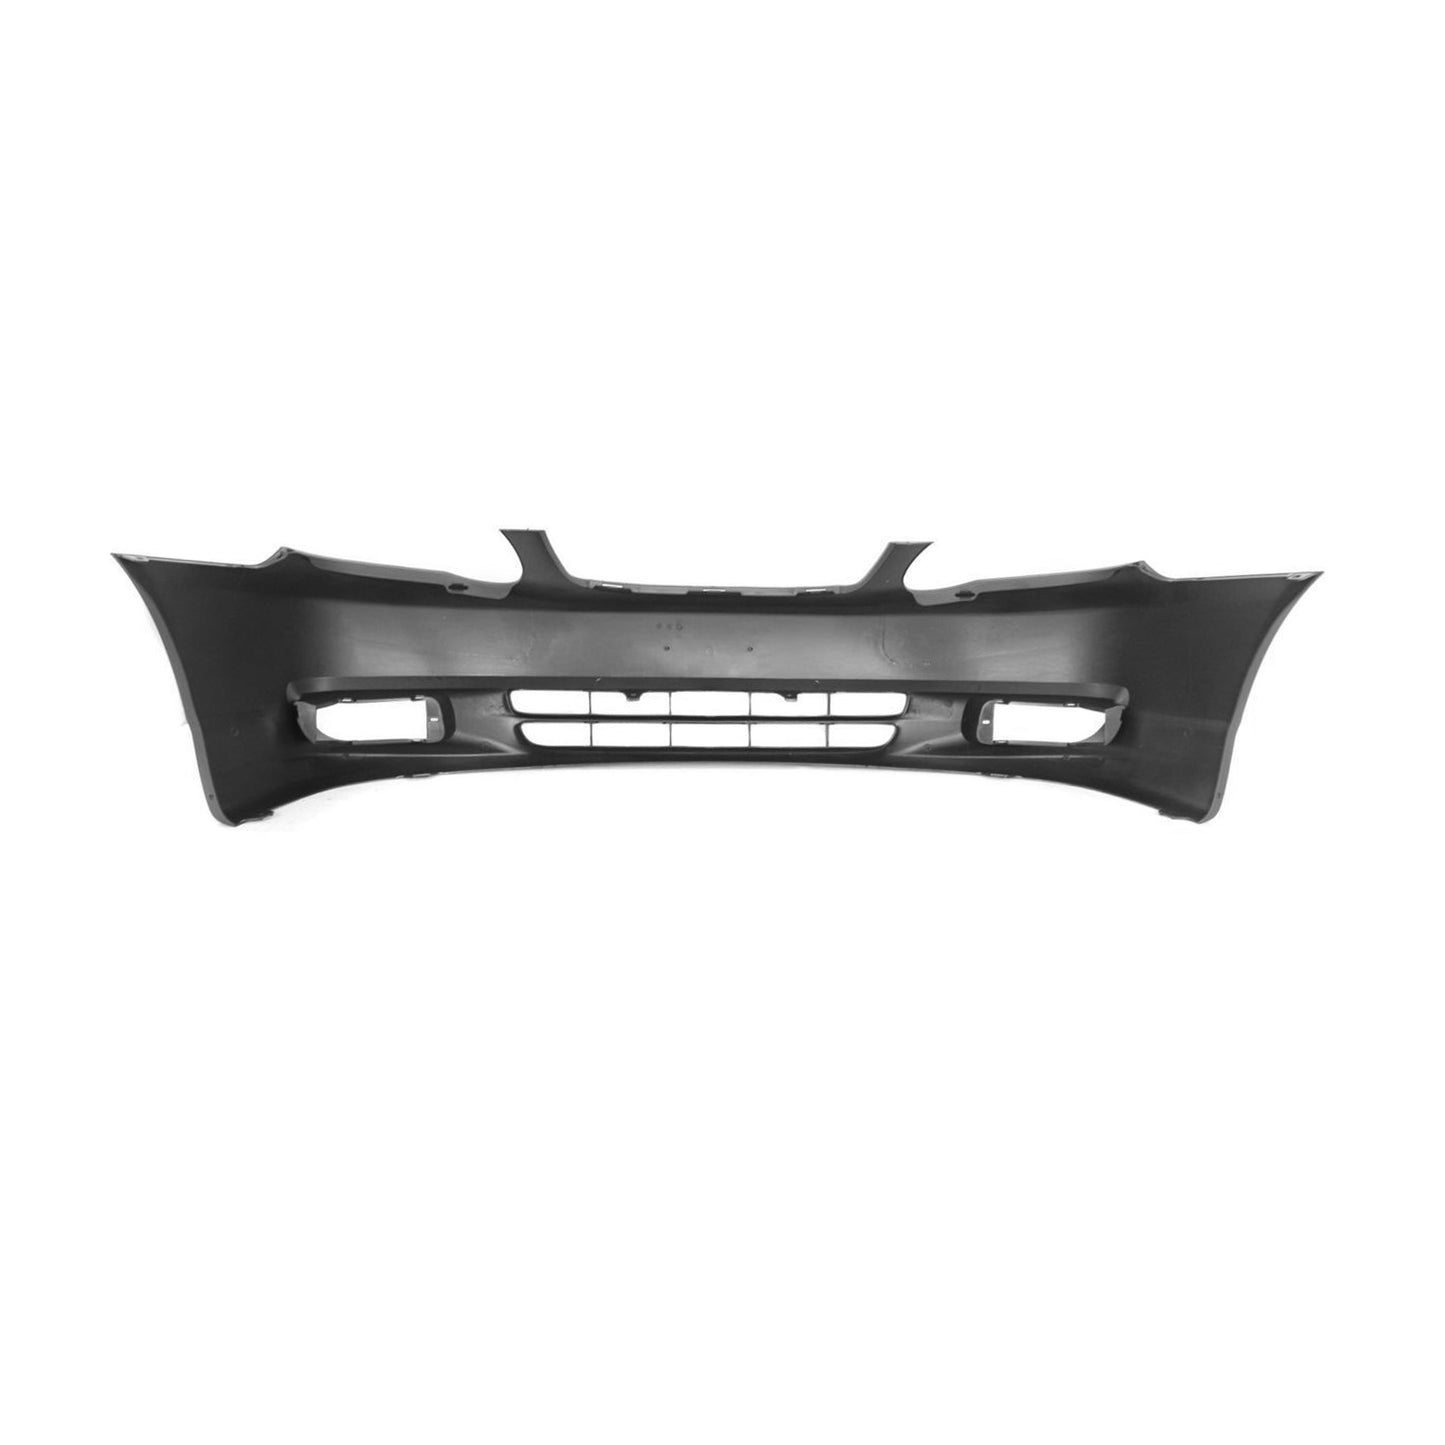 Toyota Corolla 2003 - 2004 Front Bumper Cover 03 - 04 TO1000240 Bumper King